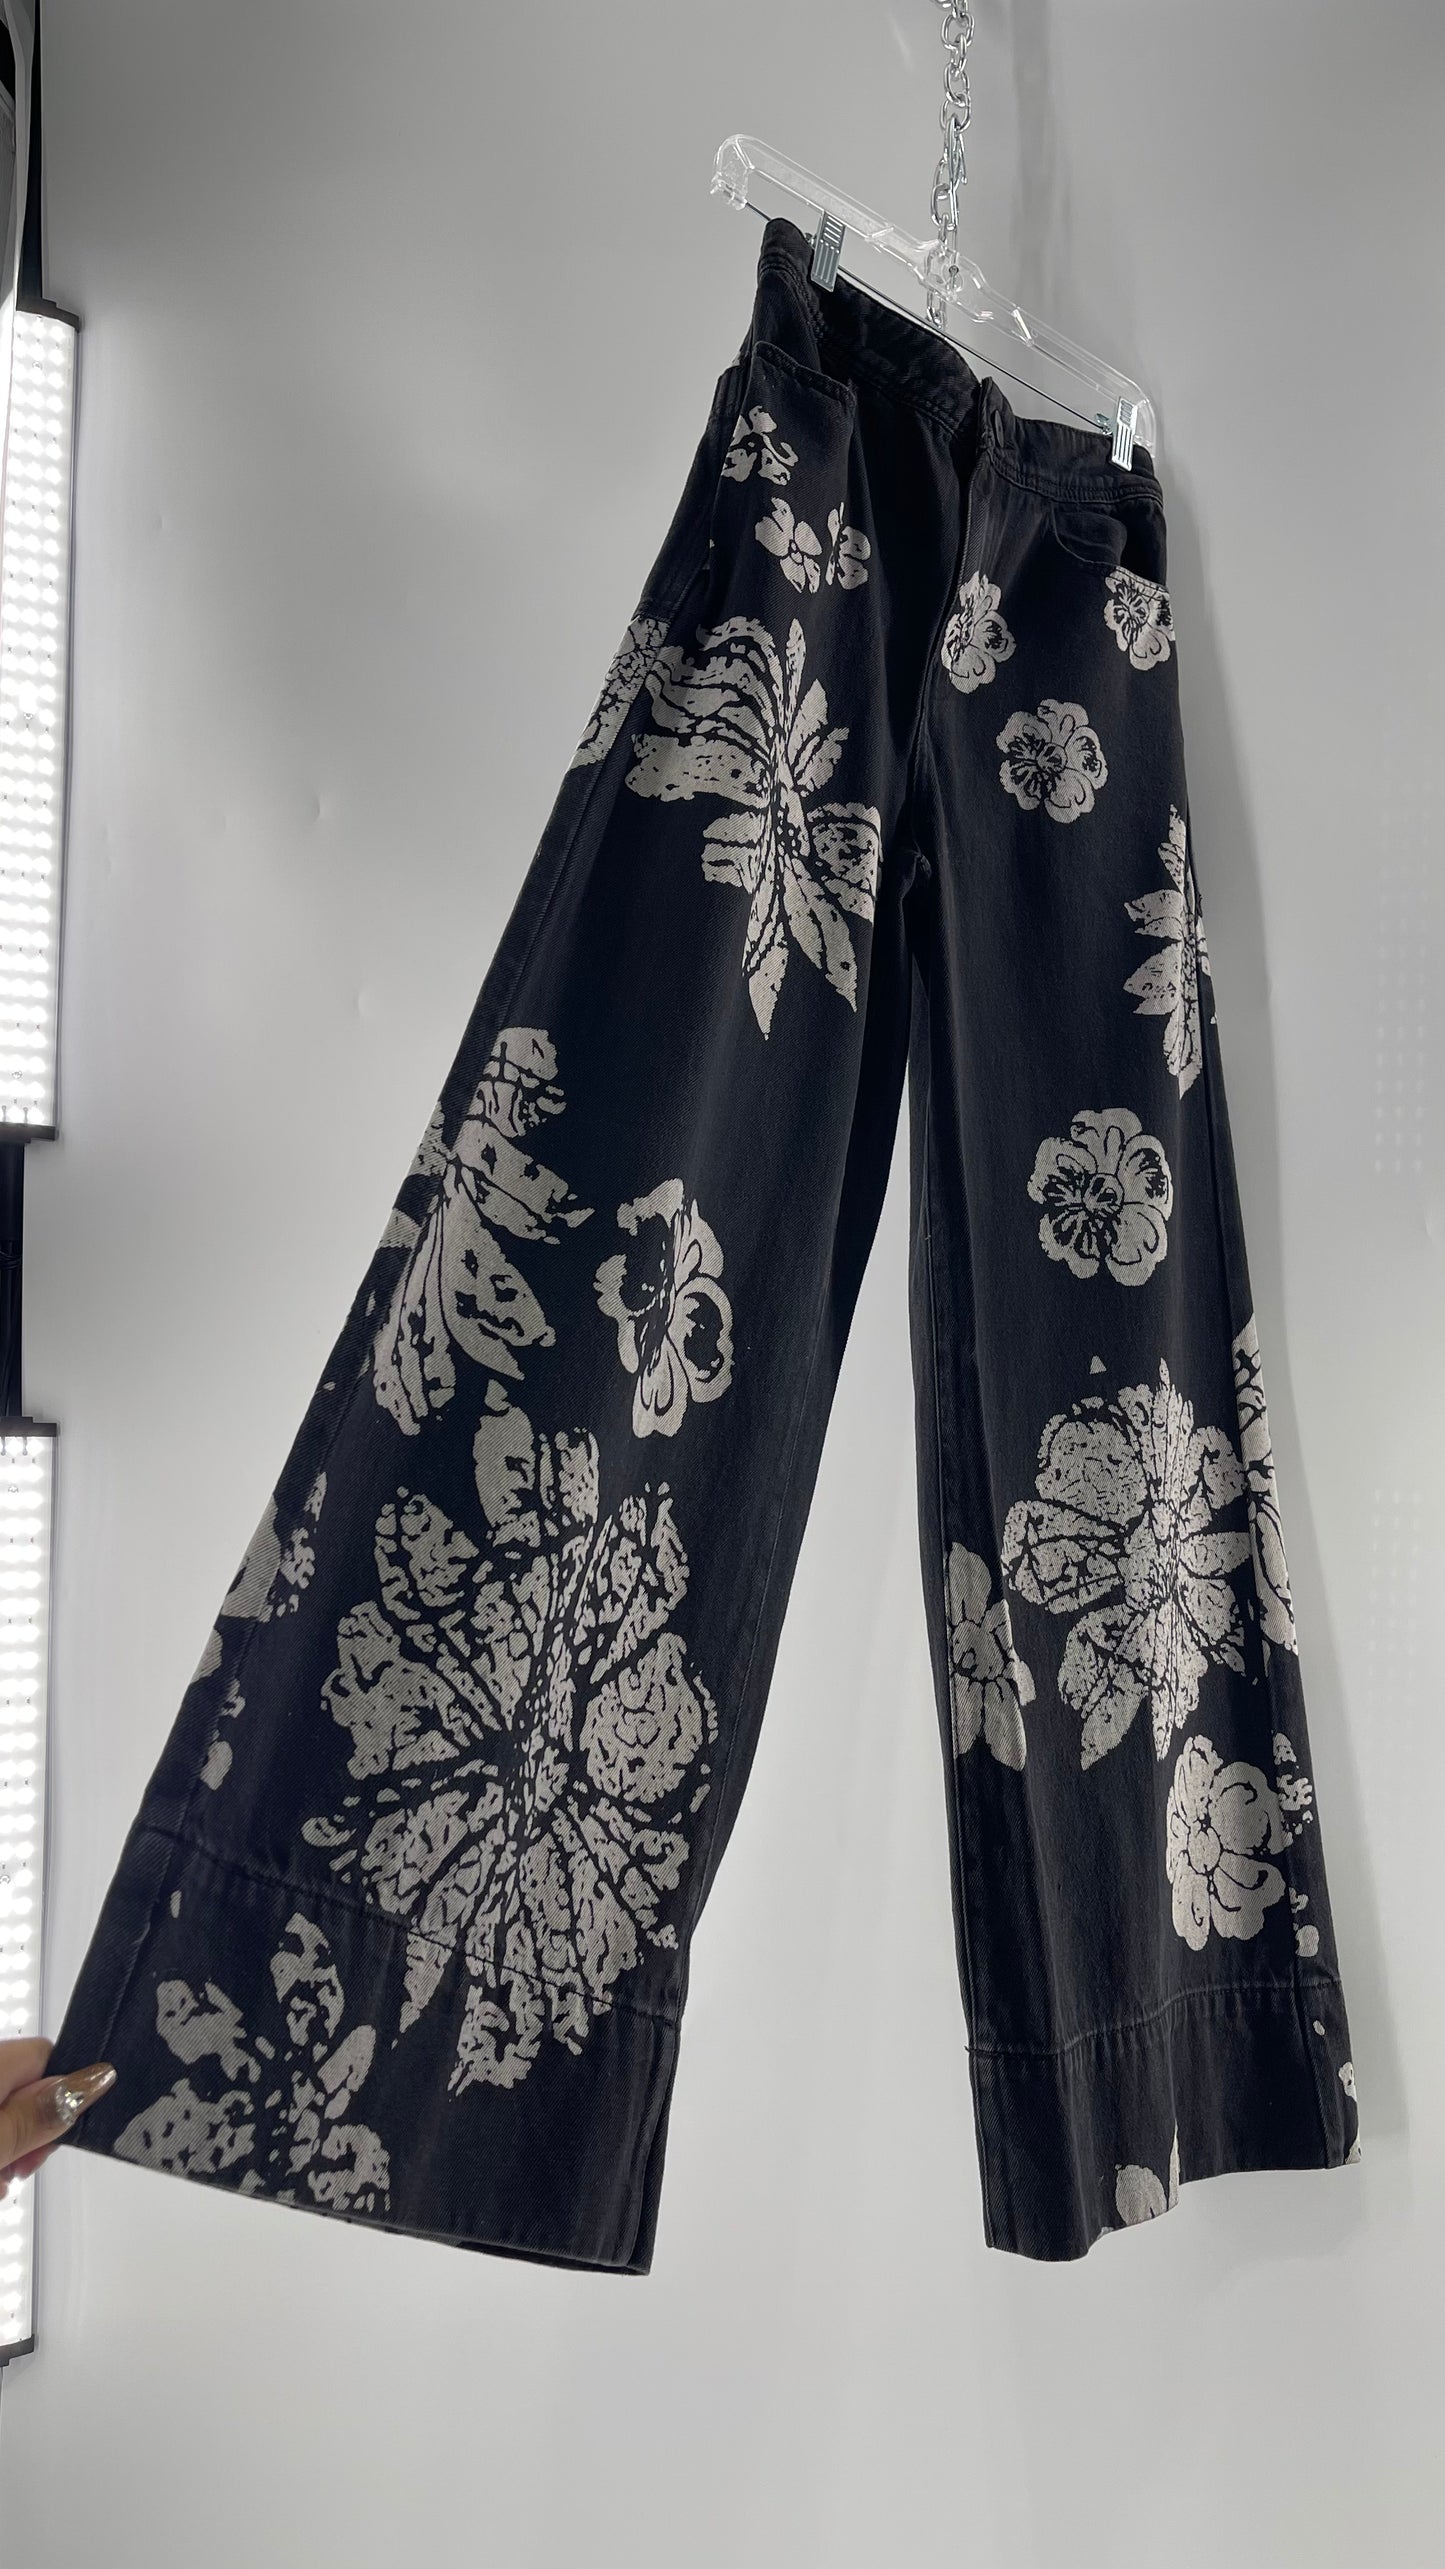 Free People Black Wide Leg Jeans with White Hibiscus Floral Design (29)